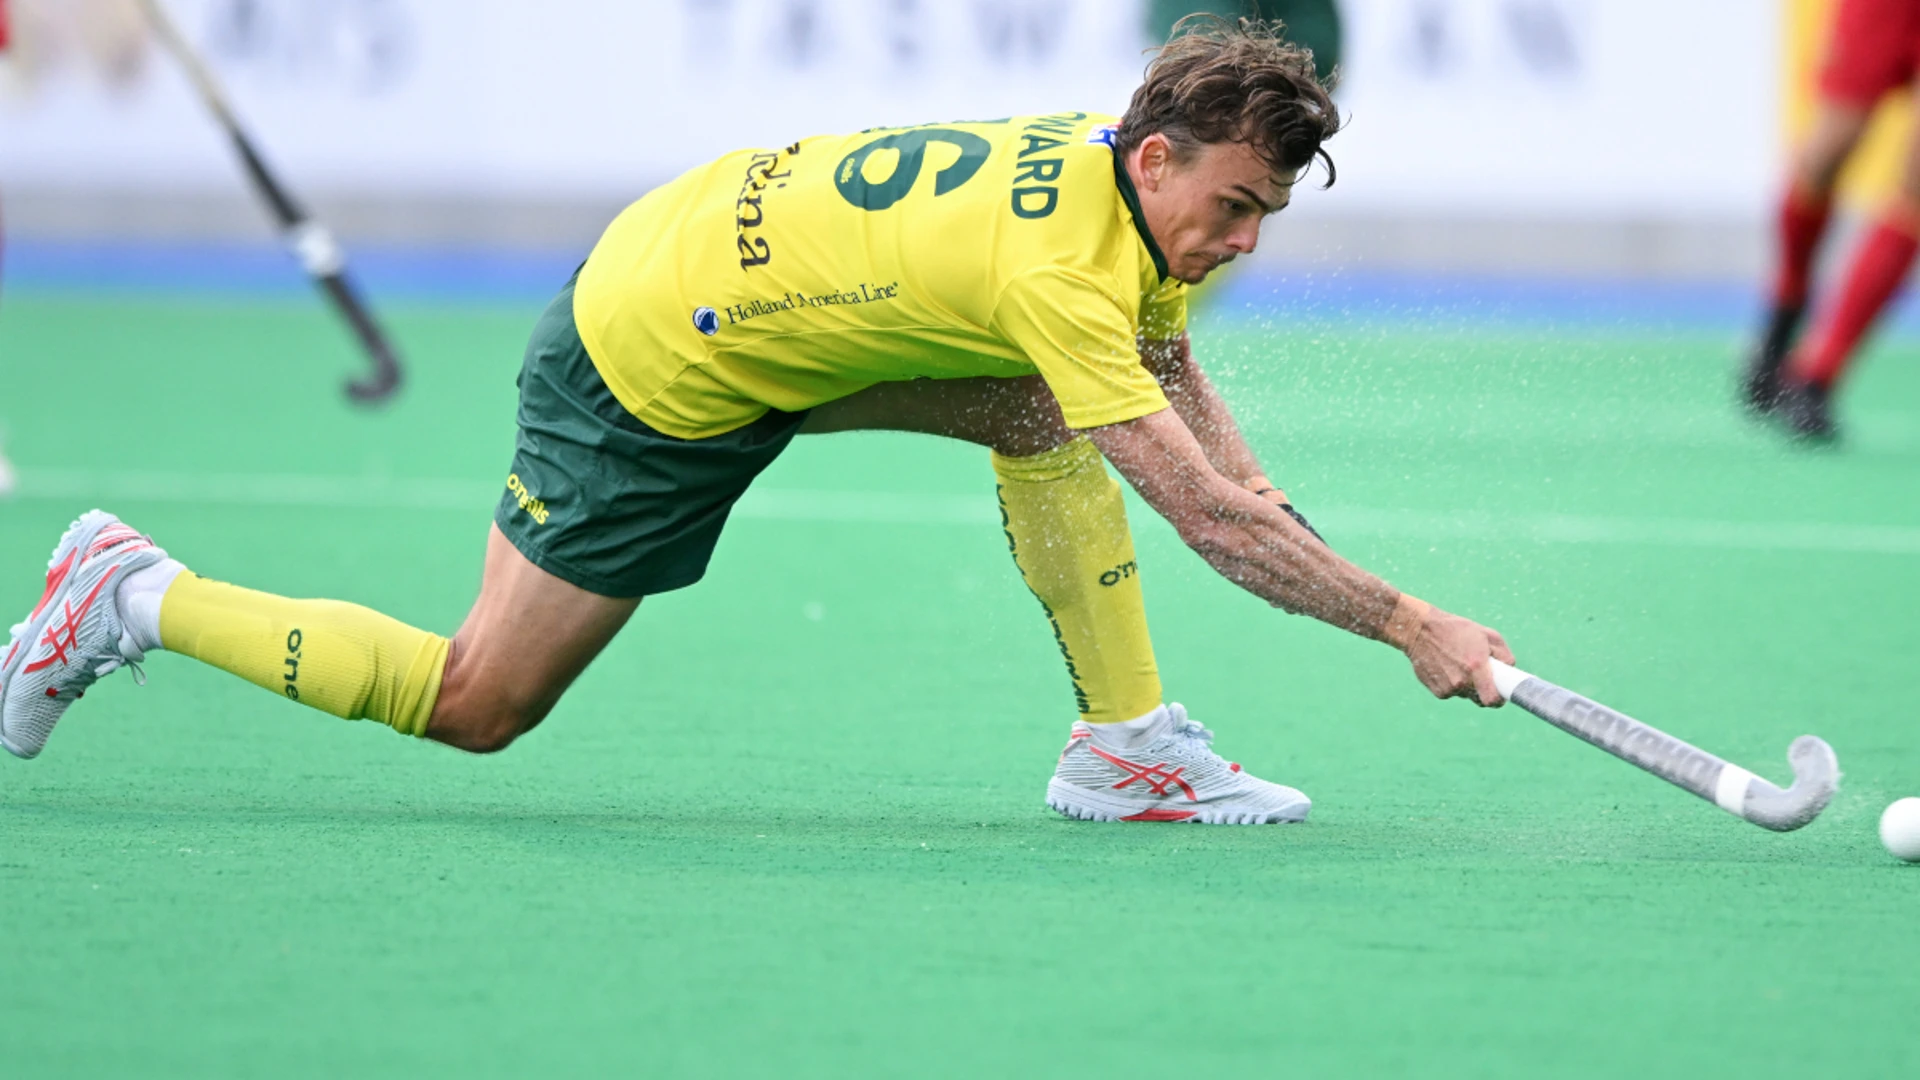 Aussie hockey player amputates part of finger to compete at Paris Games